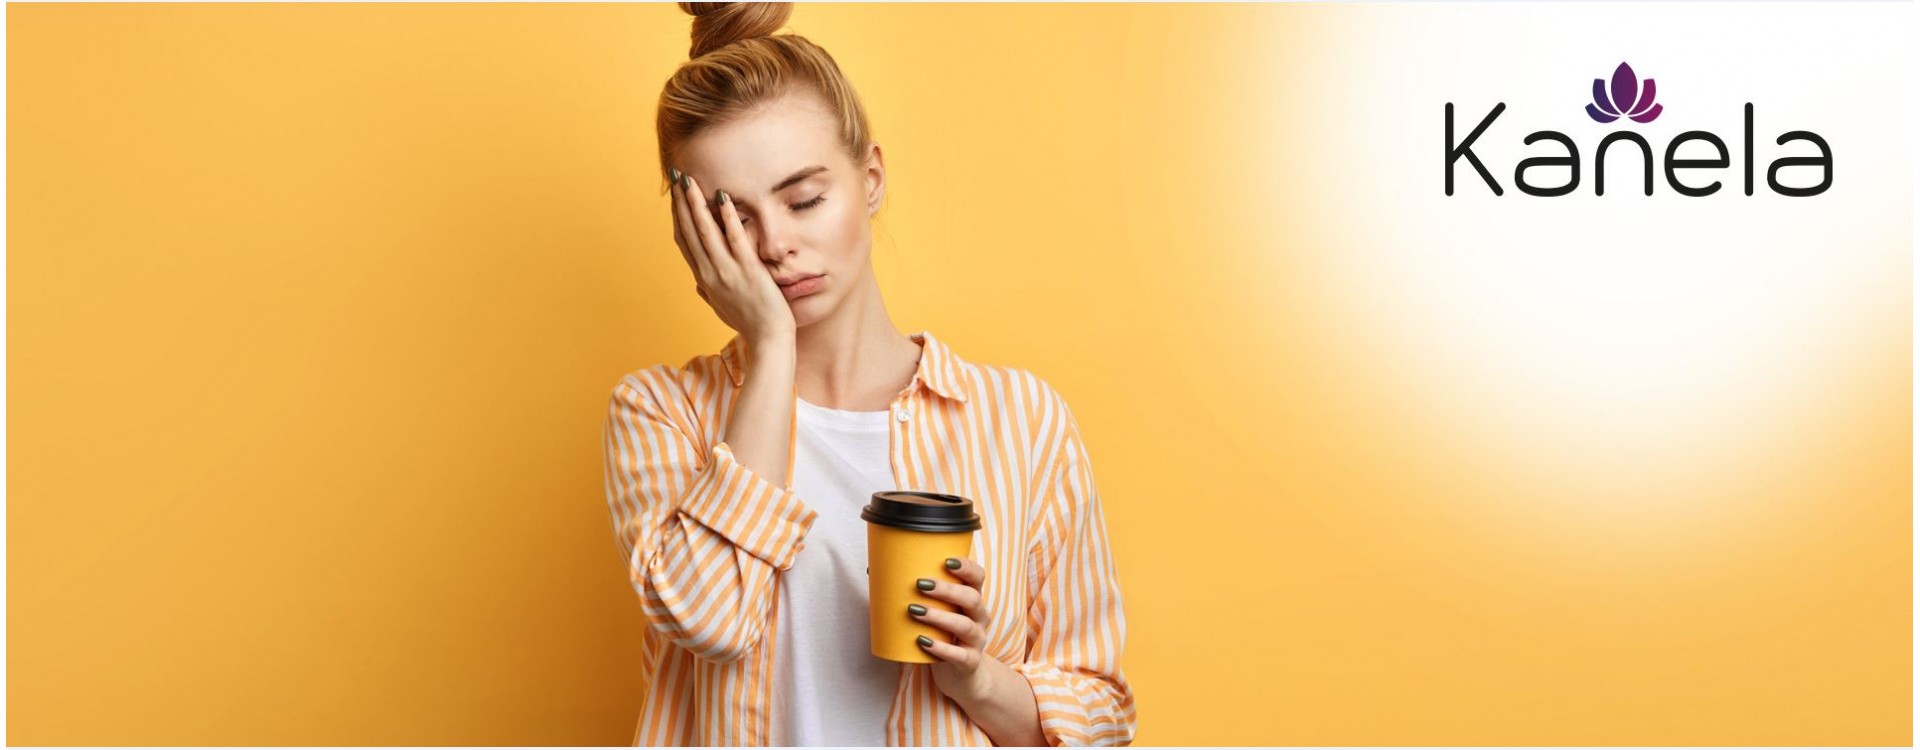 What can you do about tiredness?